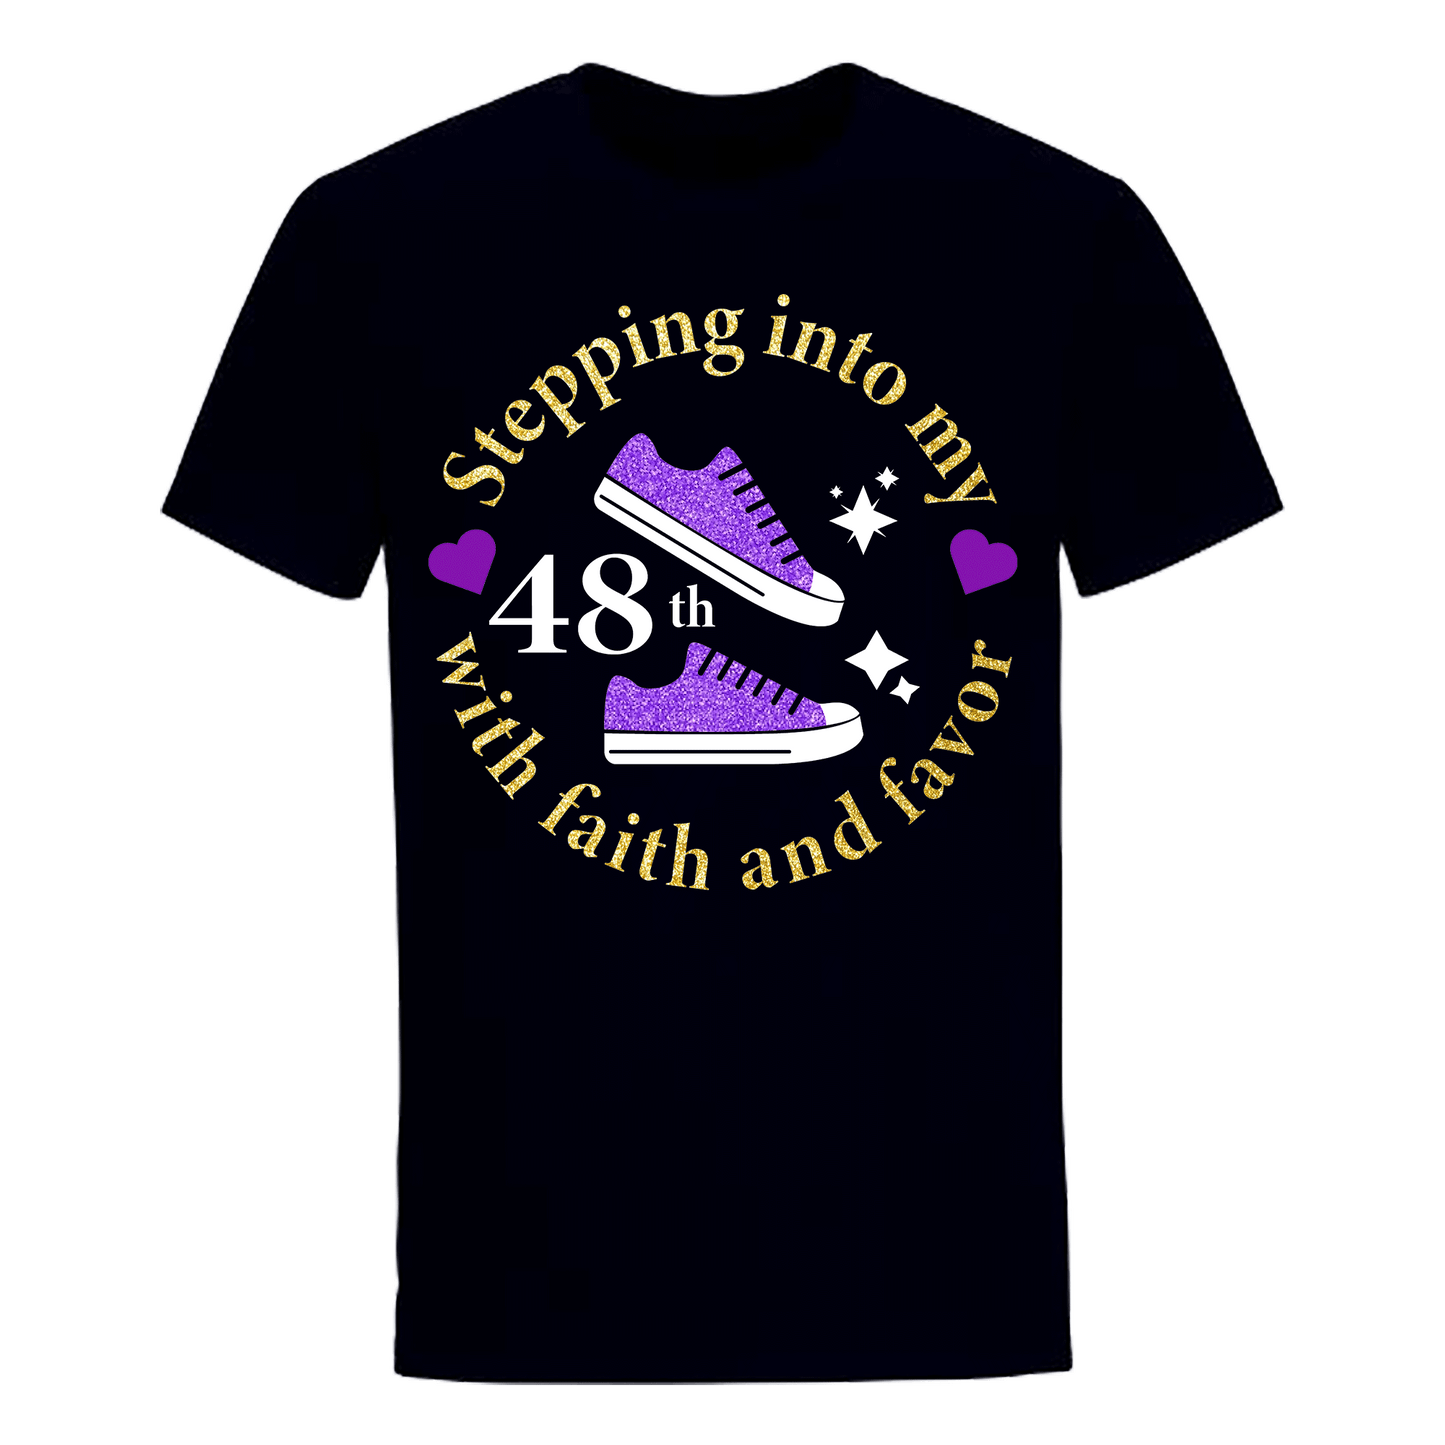 STEPPING INTO 48TH WITH FAITH & FAVOR UNISEX SHIRT